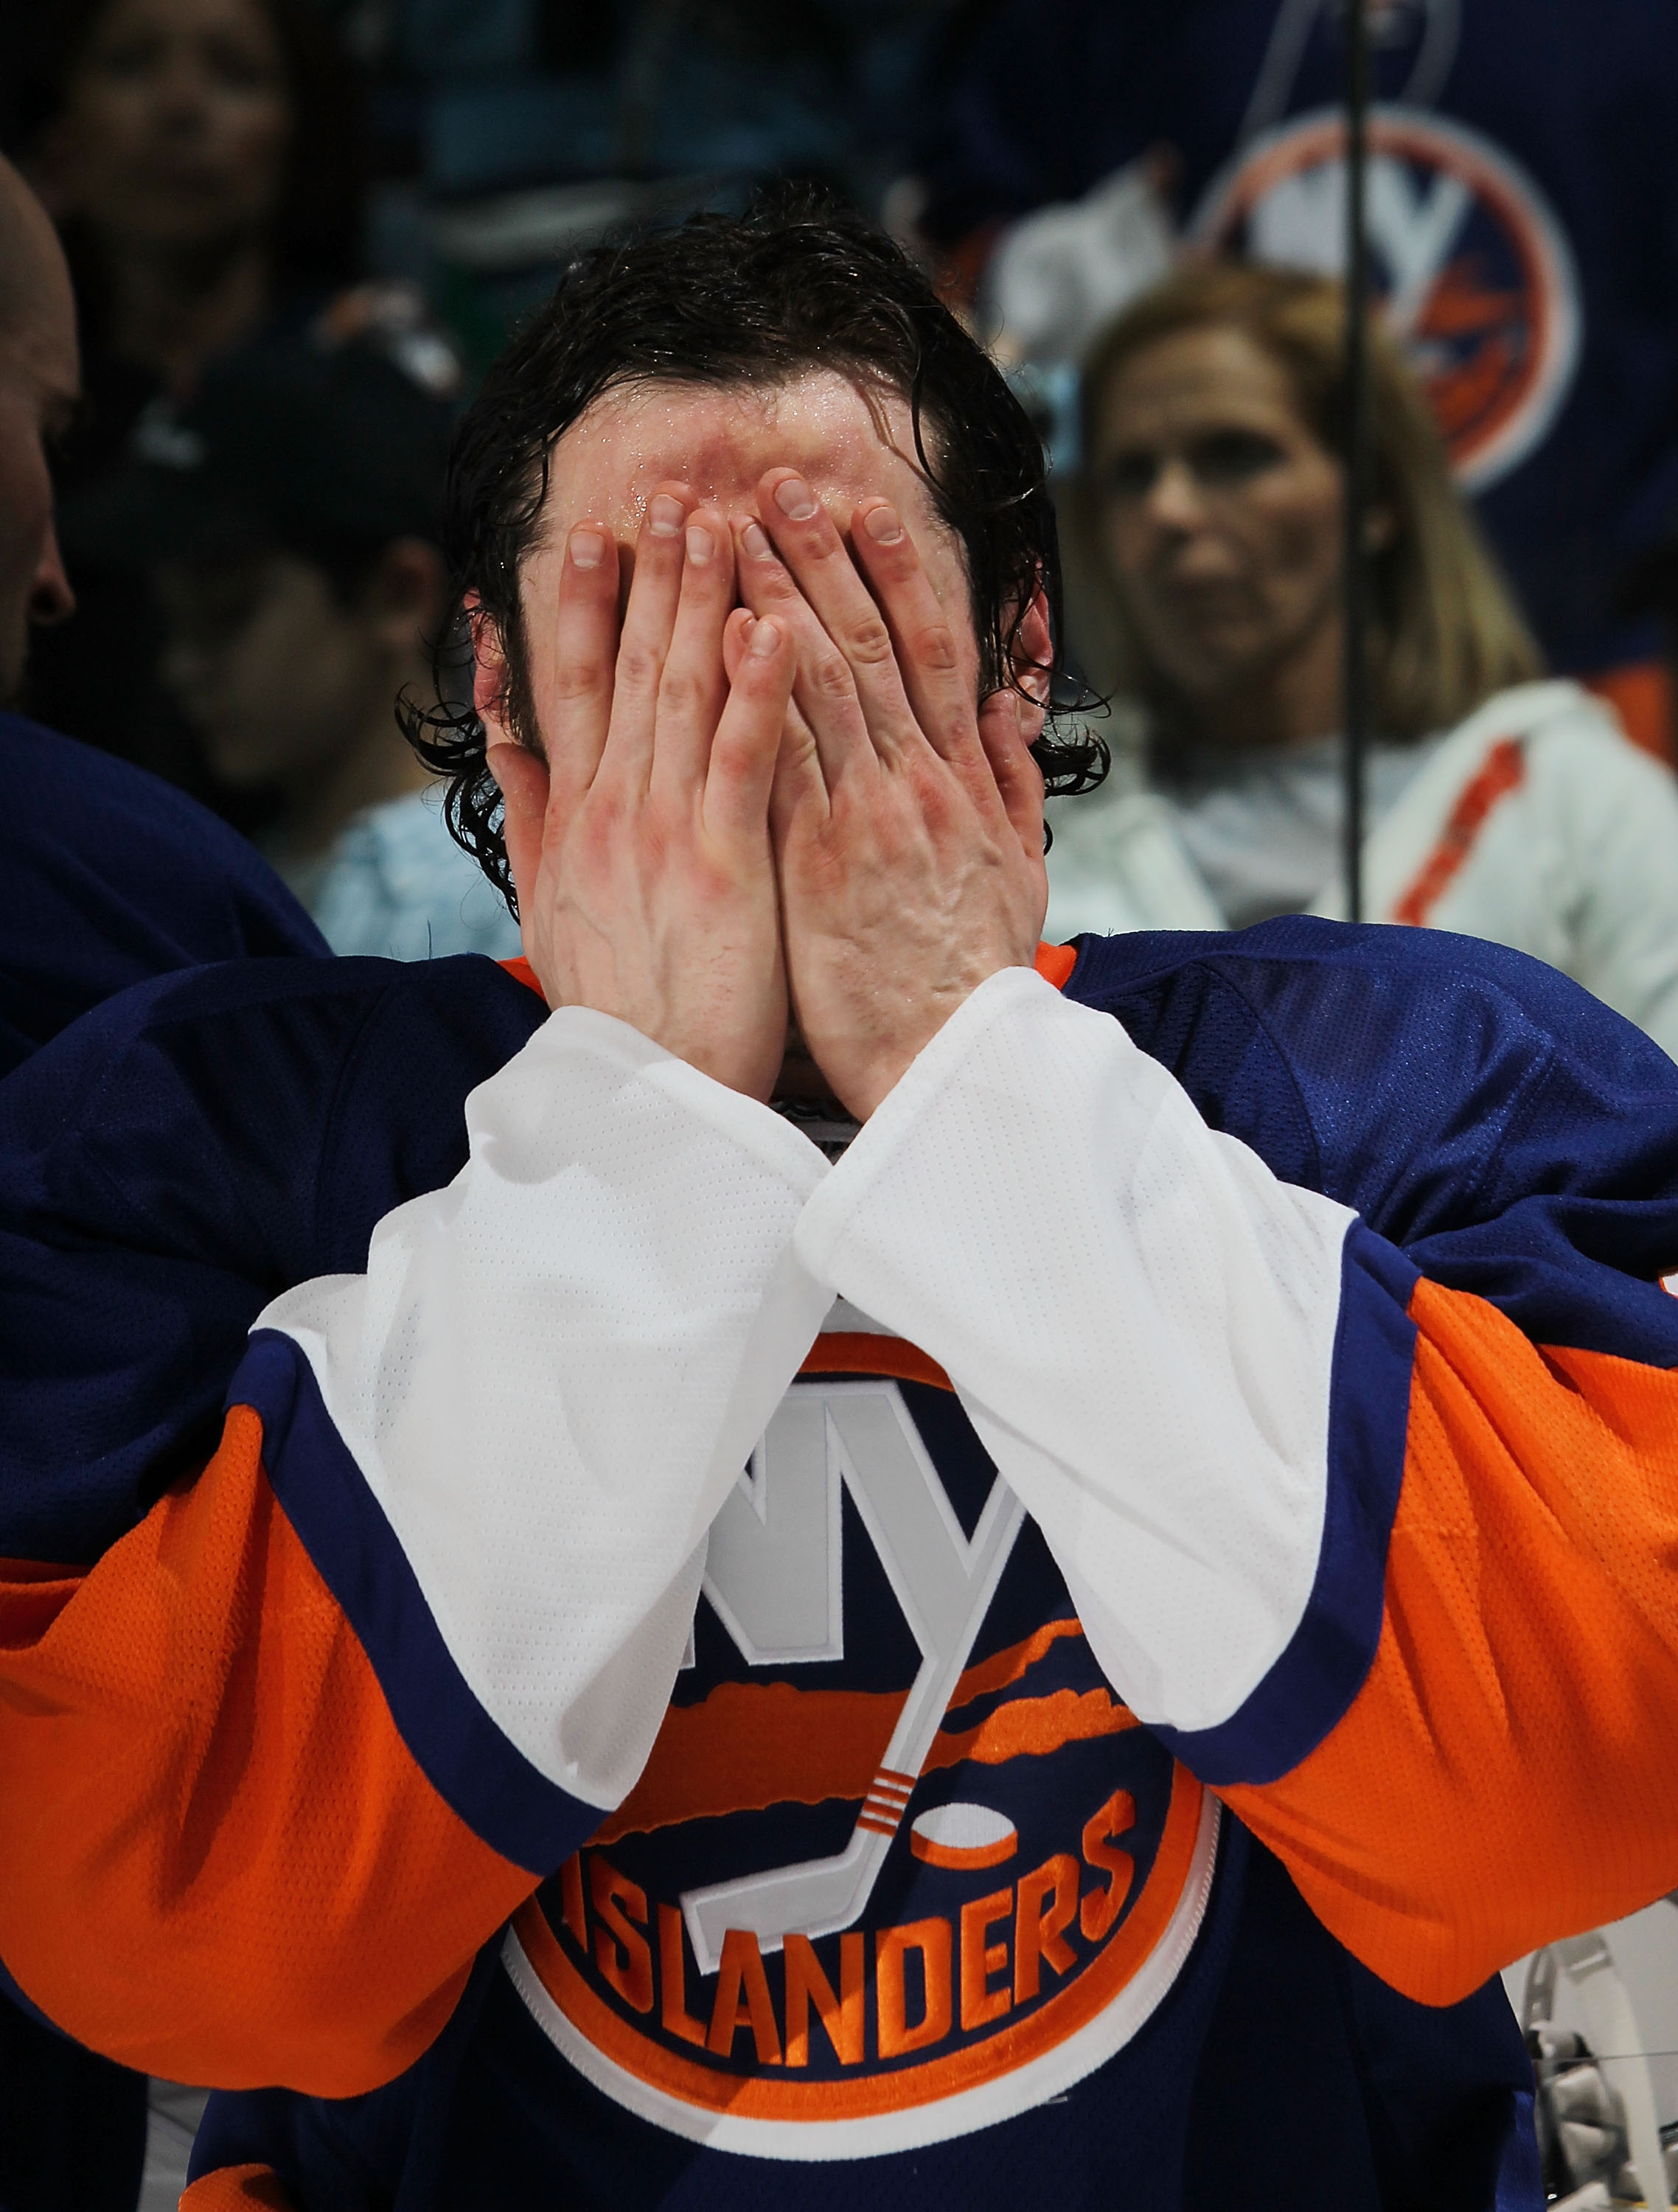 UNIONDALE, NY - APRIL 11: Mark Streit #2 of the New York Islanders prepares for post game event following the Islanders overtime loss to the Pittsburgh Penguins at the Nassau Coliseum on April 11, 2010 in Uniondale, New York. (Photo by Bruce Bennett/Getty